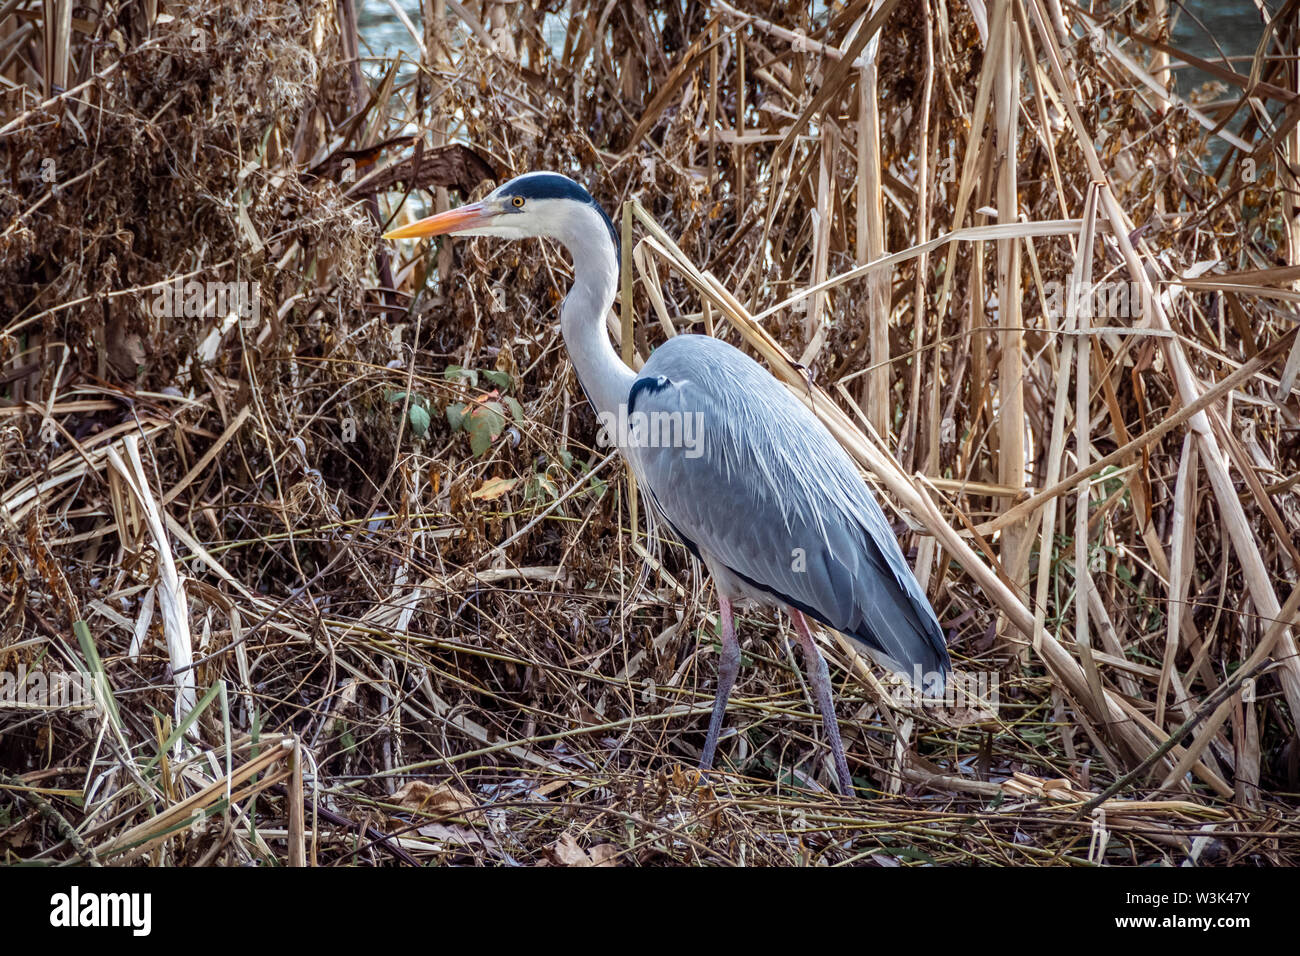 A Great Blue Heron bird hunting on the canalside 3 Stock Photo